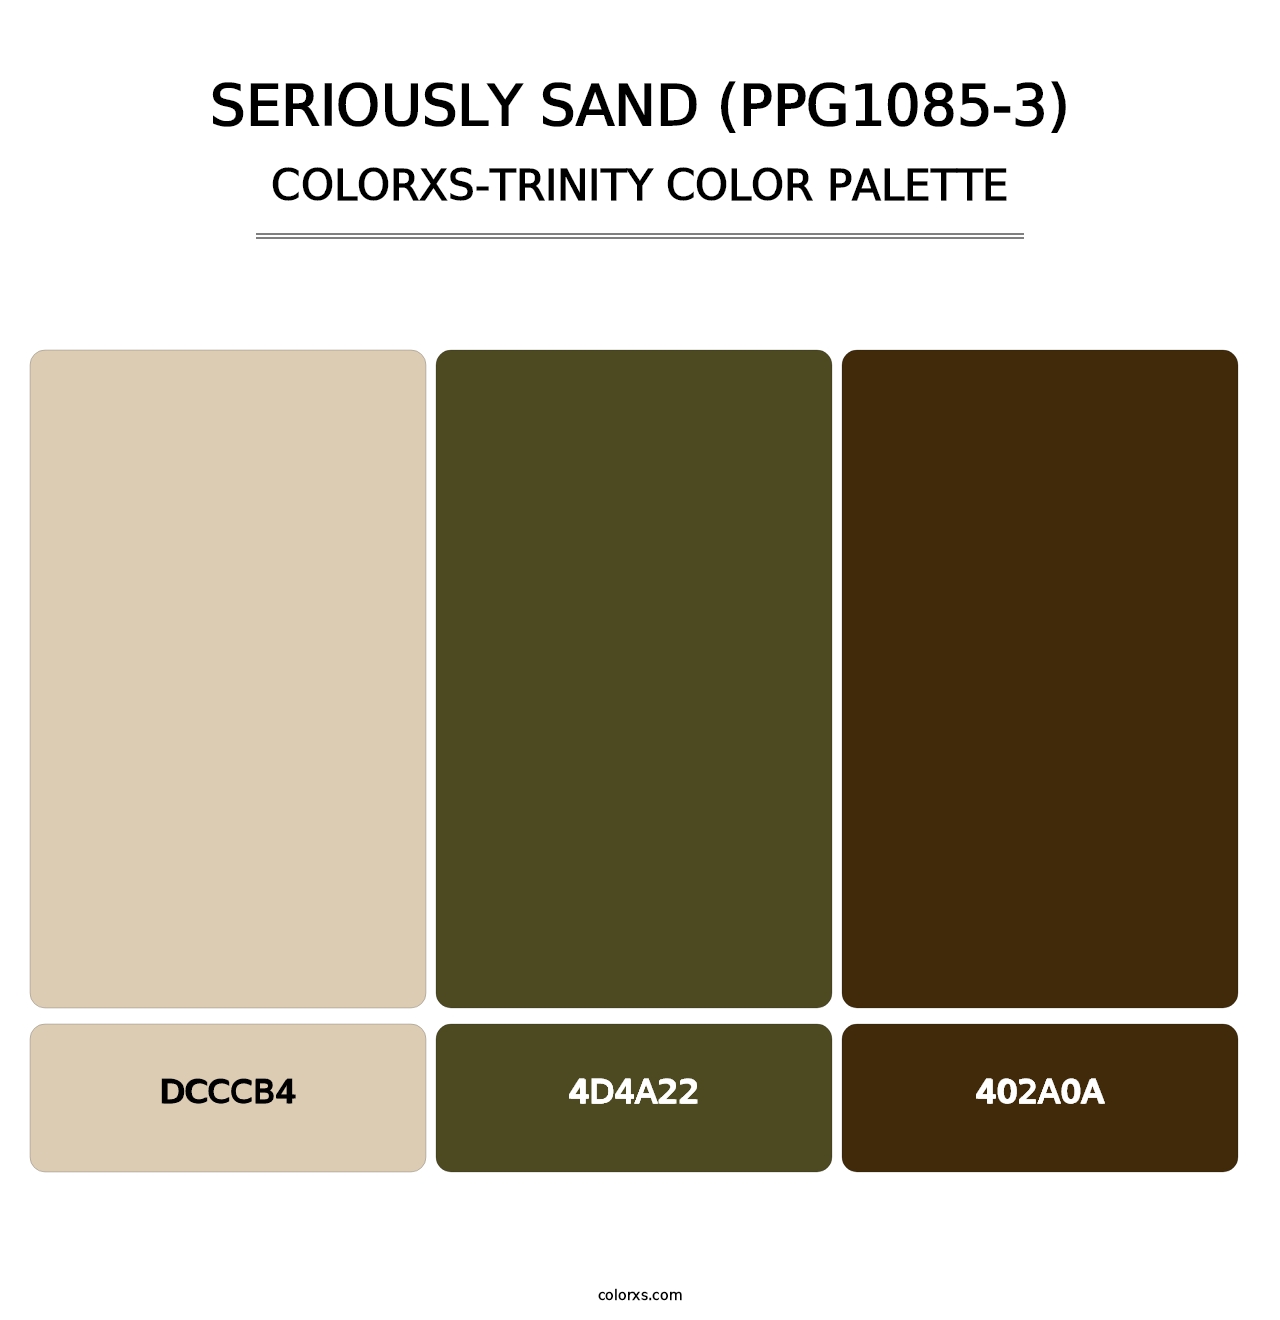 Seriously Sand (PPG1085-3) - Colorxs Trinity Palette